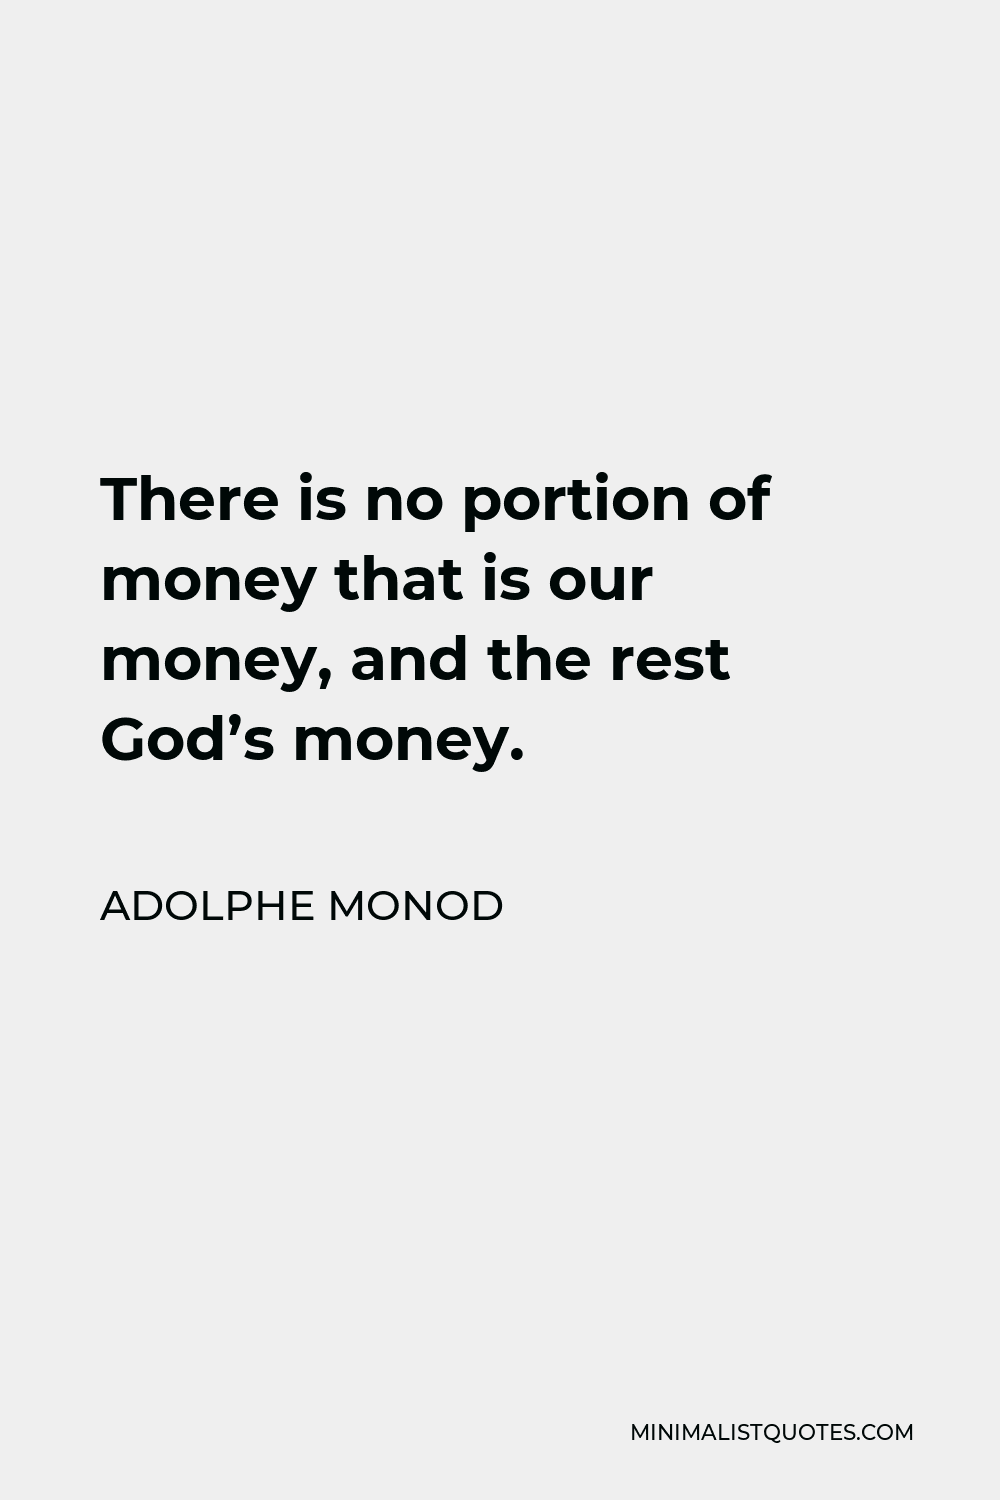 Adolphe Monod Quote - There is no portion of money that is our money, and the rest God’s money.